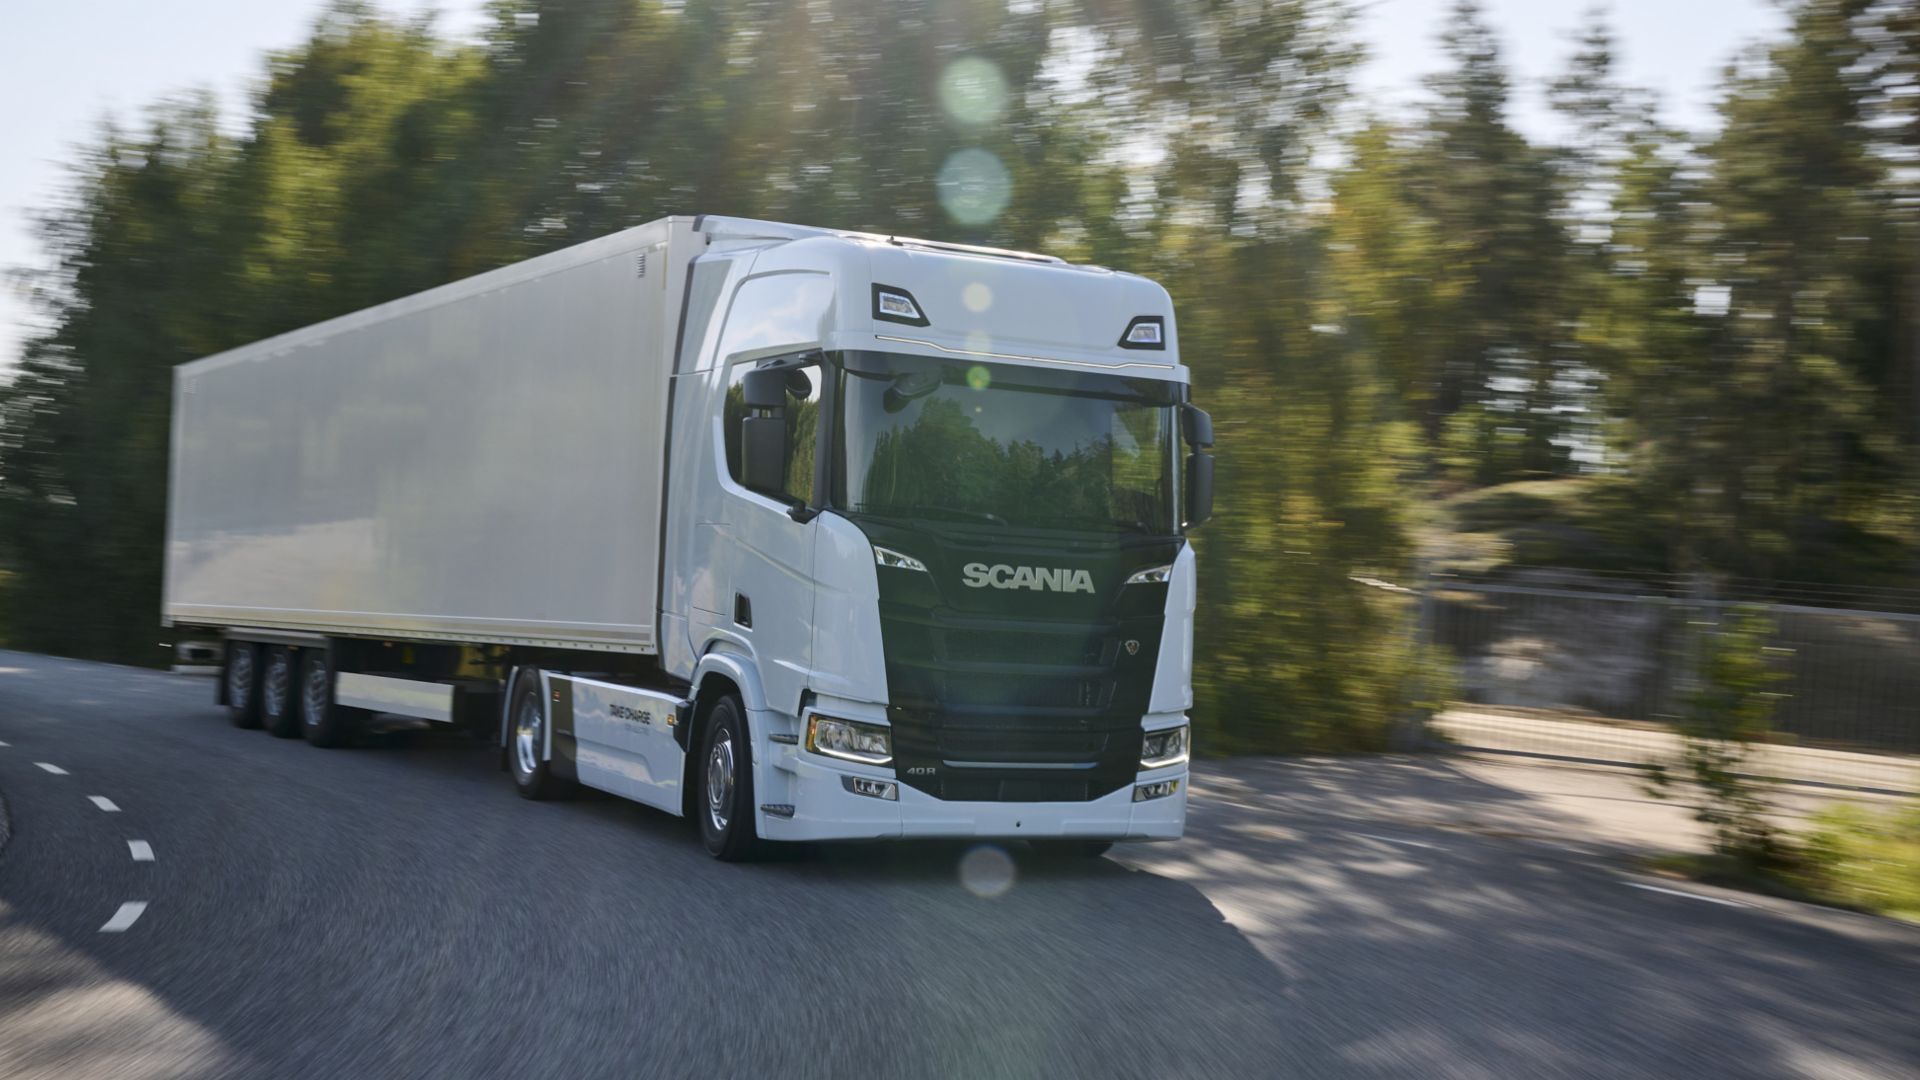 Scania and SSAB have signed a letter of intent to decarbonise all steel deliveries from SSAB to Scania’s heavy-duty vehicles in 2030.